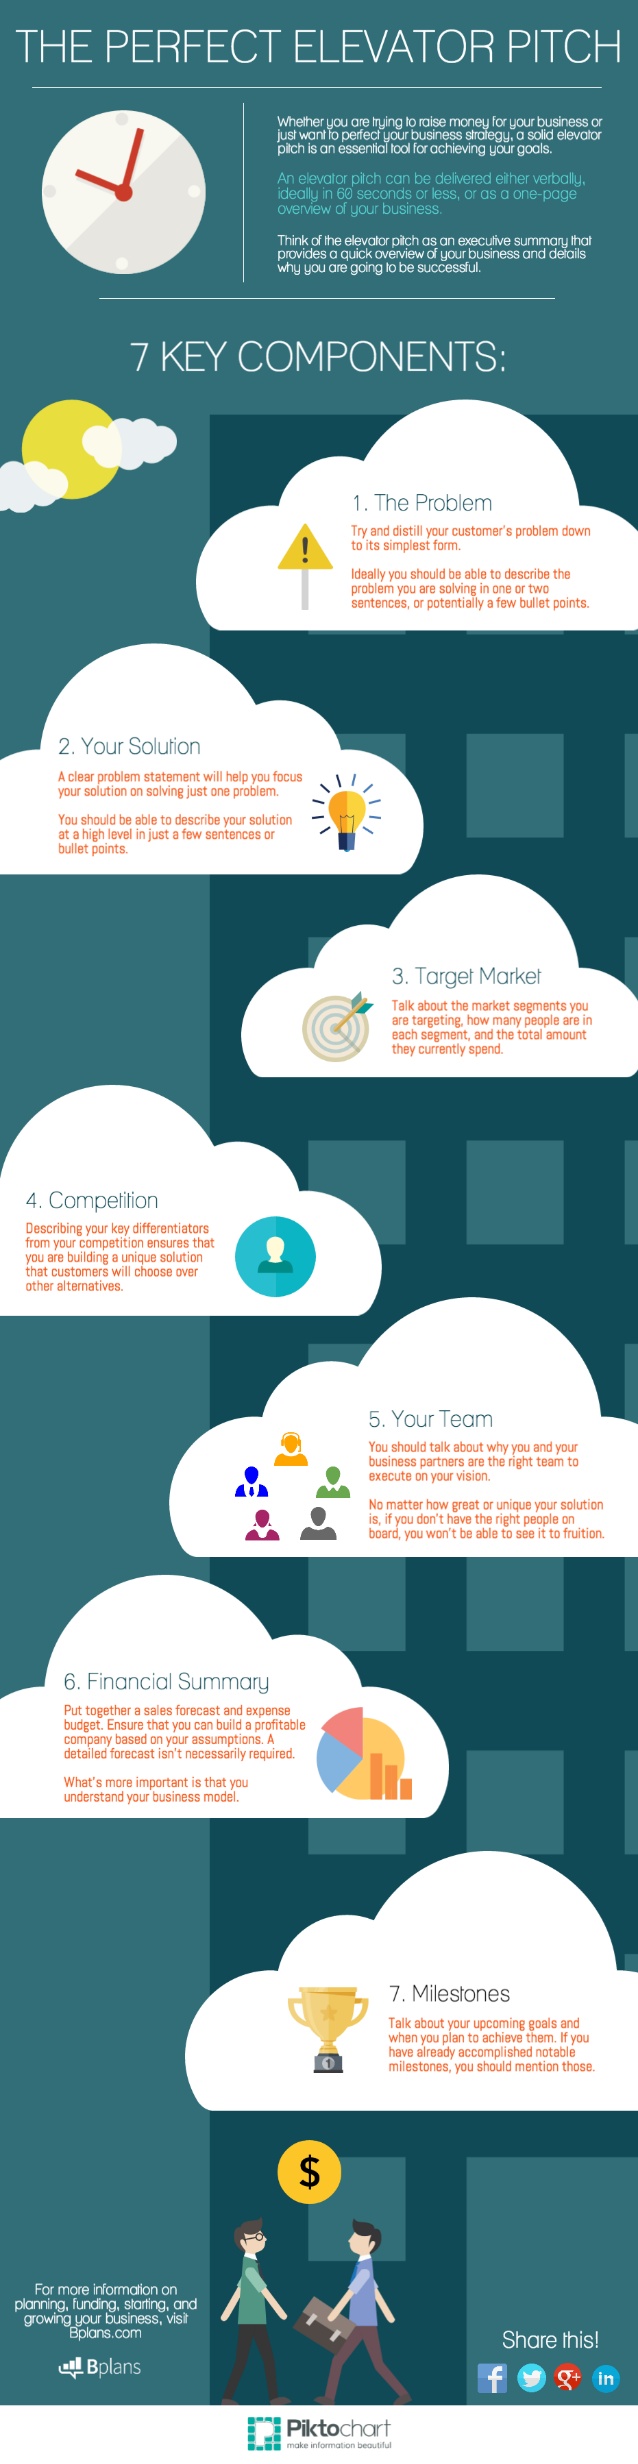 The 7 Key Components of a Perfect Elevator Pitch [with Infographic]